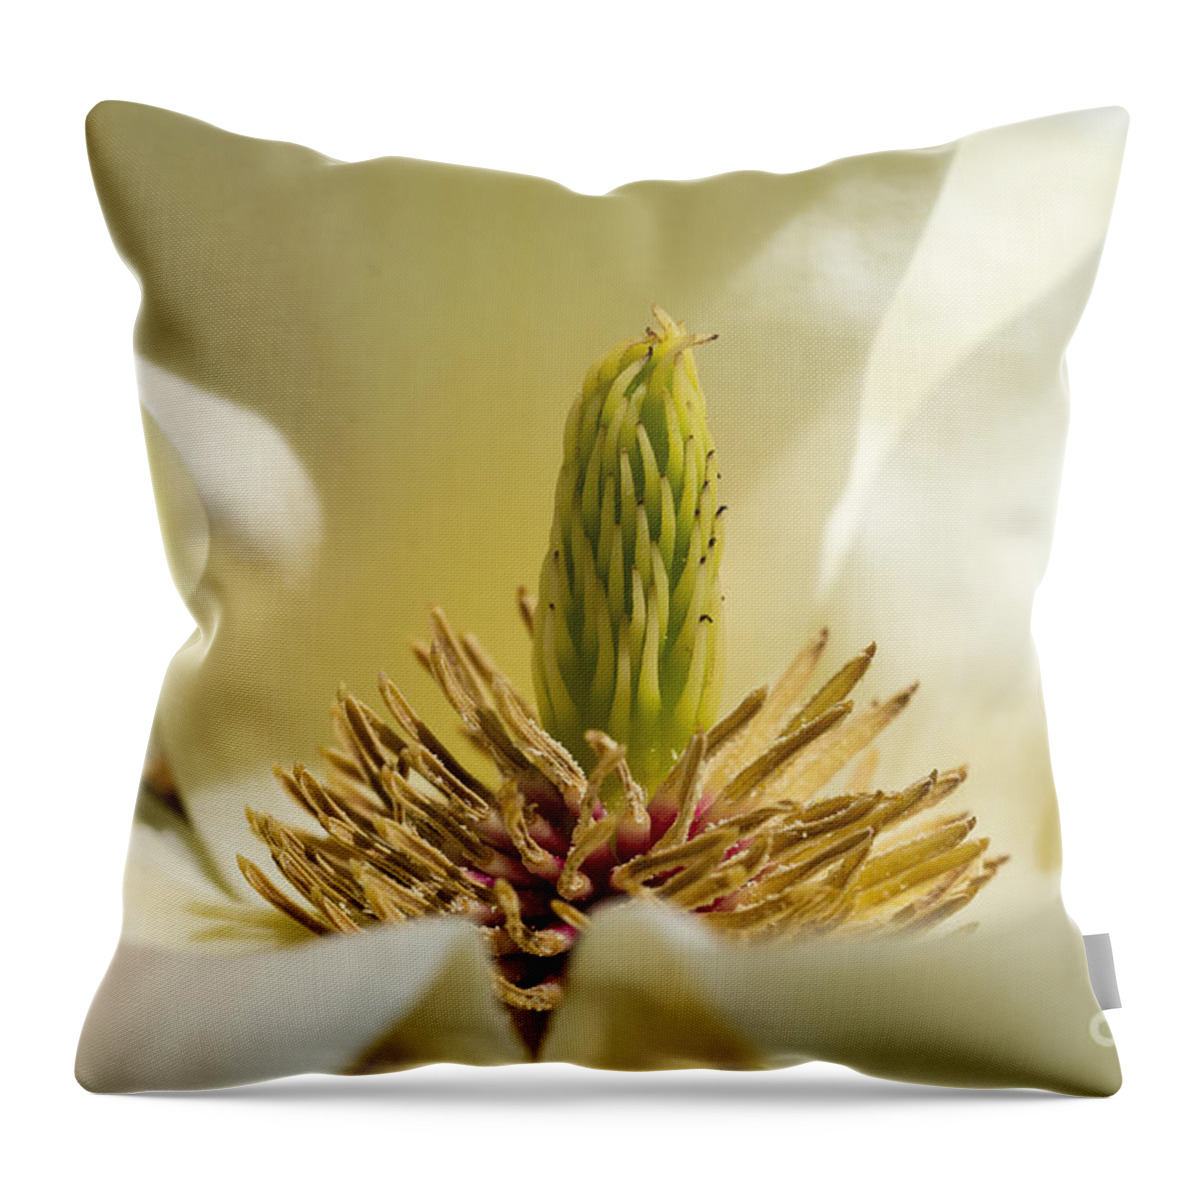 Arboretum Throw Pillow featuring the photograph Magnolia #2 by Steven Ralser